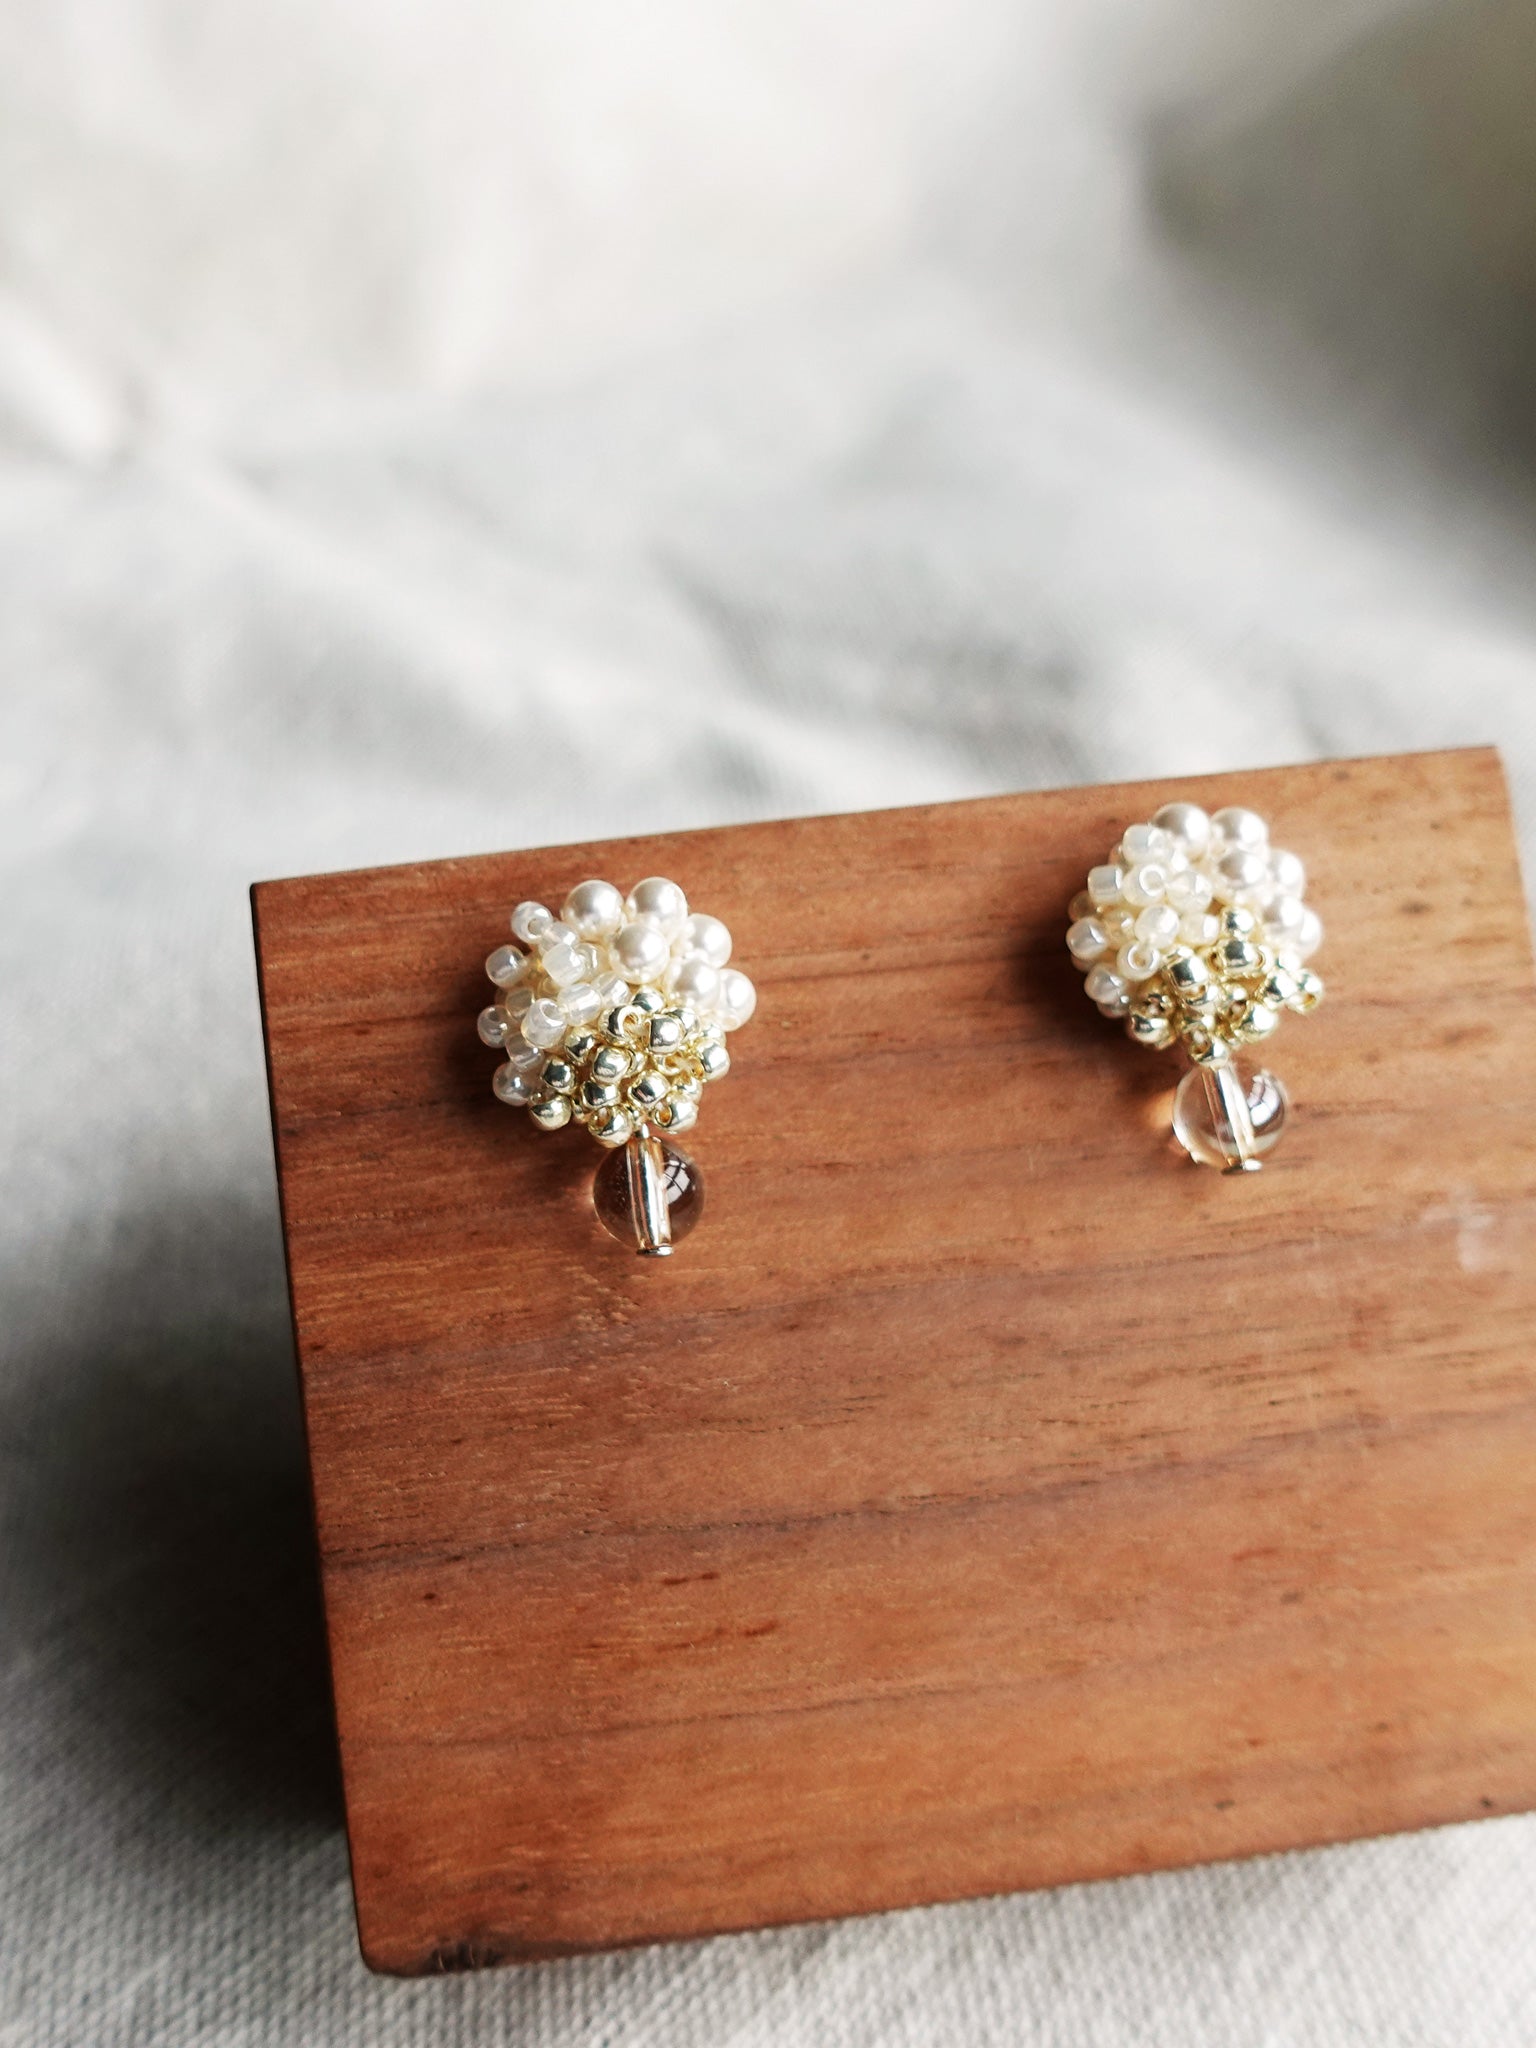 Ariana Auroriel Earrings in Ivory Display Front